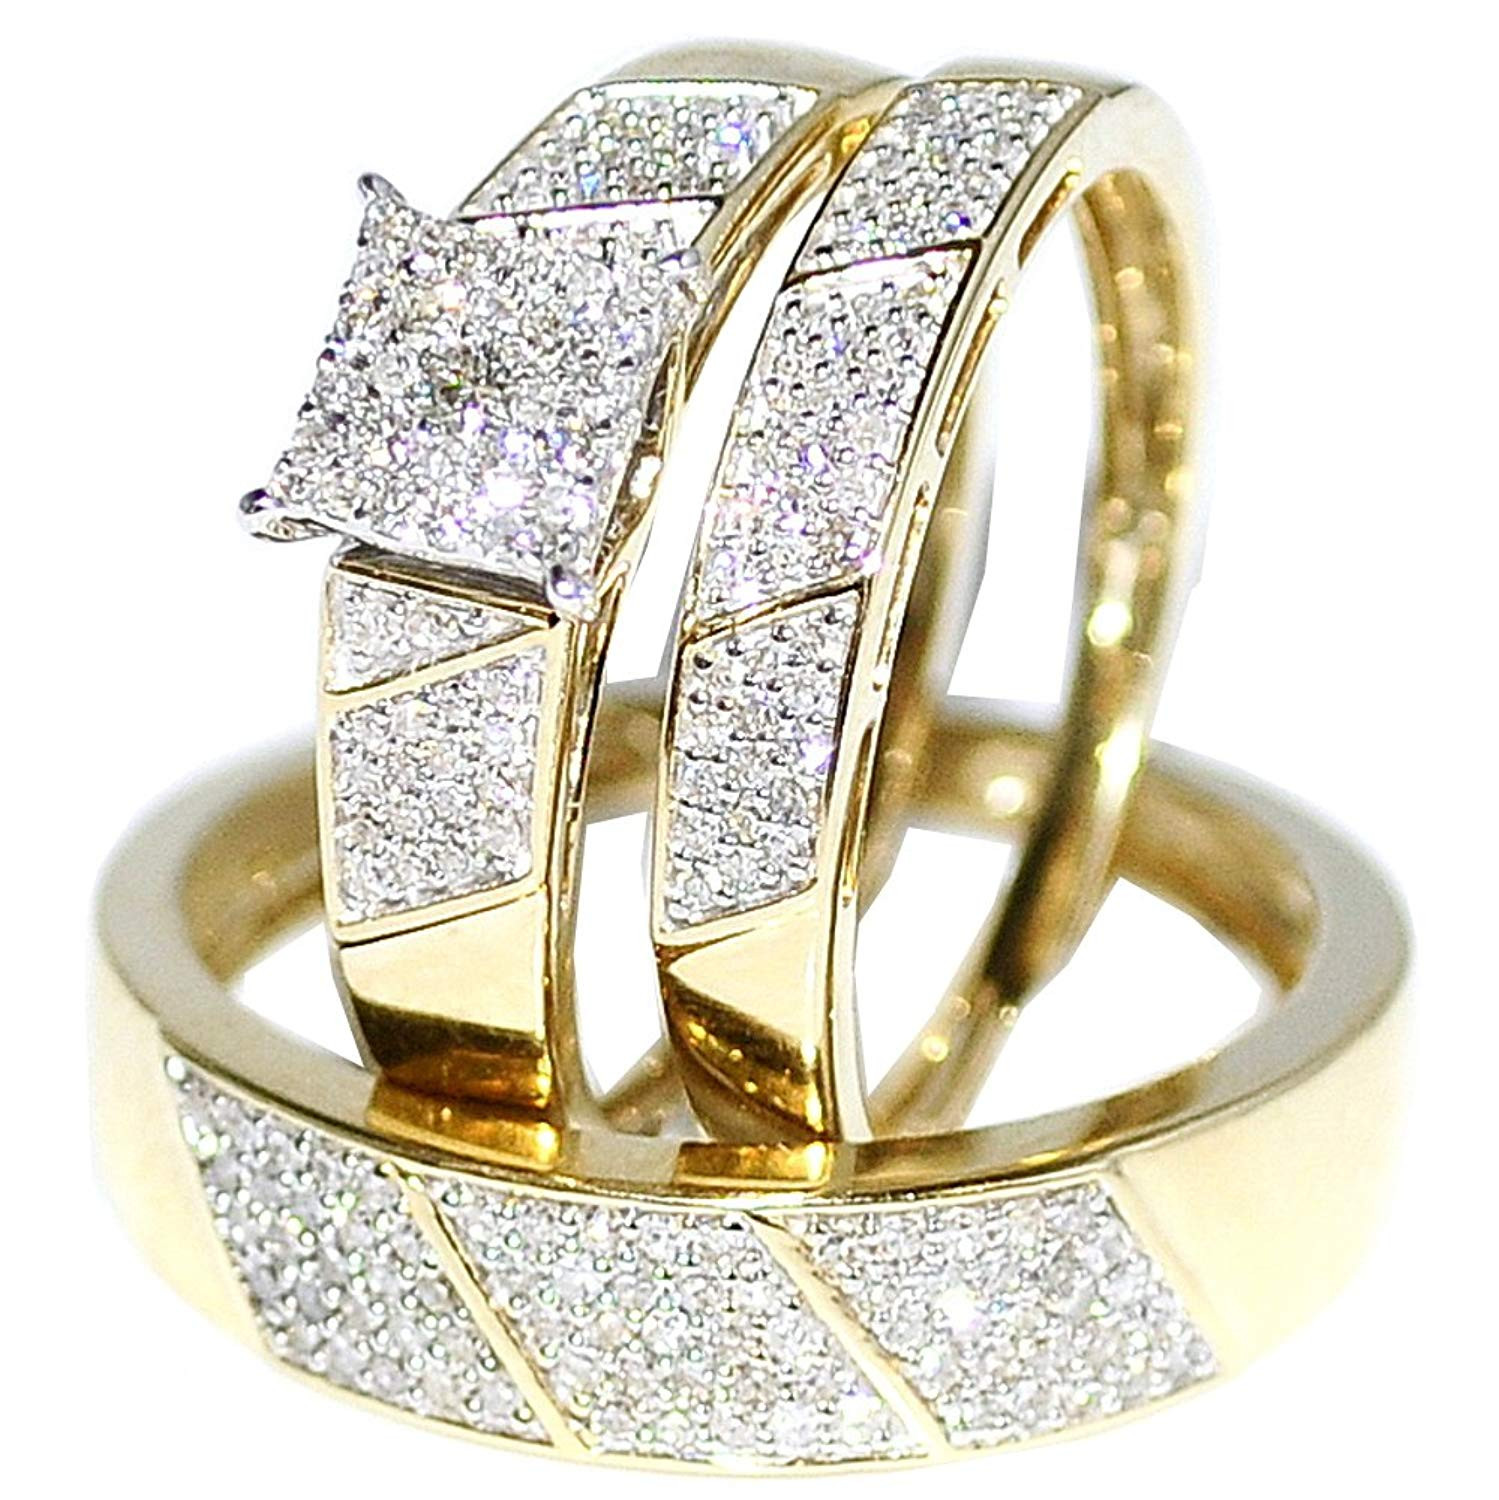 25 Ideas for Cheap Wedding Ring Sets His and Hers - Home, Family, Style and Art Ideas